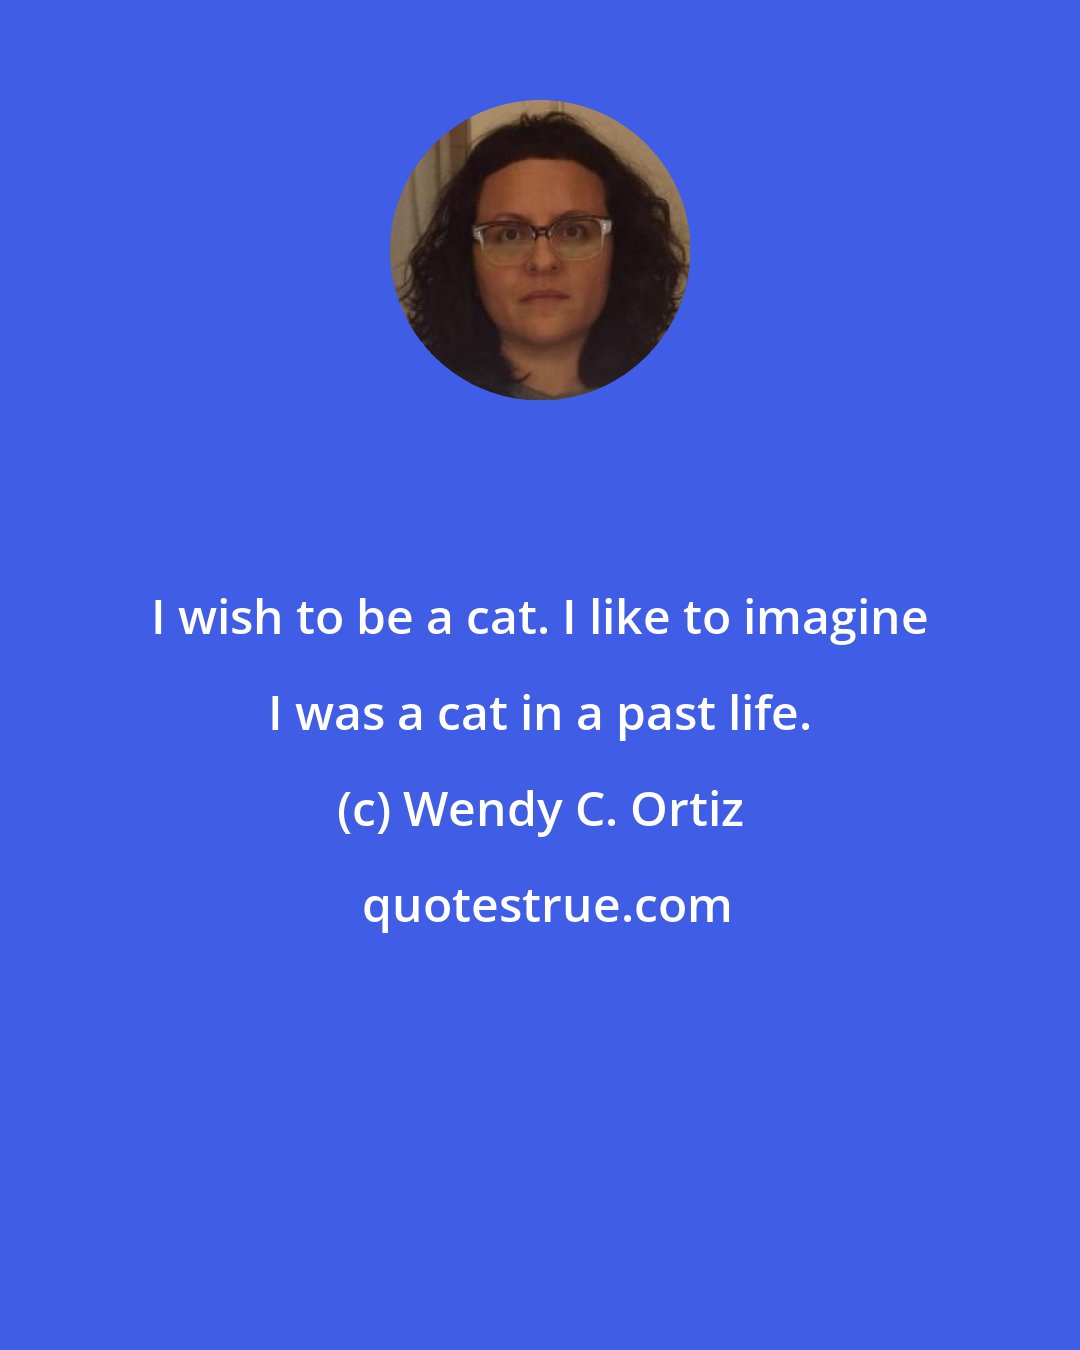 Wendy C. Ortiz: I wish to be a cat. I like to imagine I was a cat in a past life.